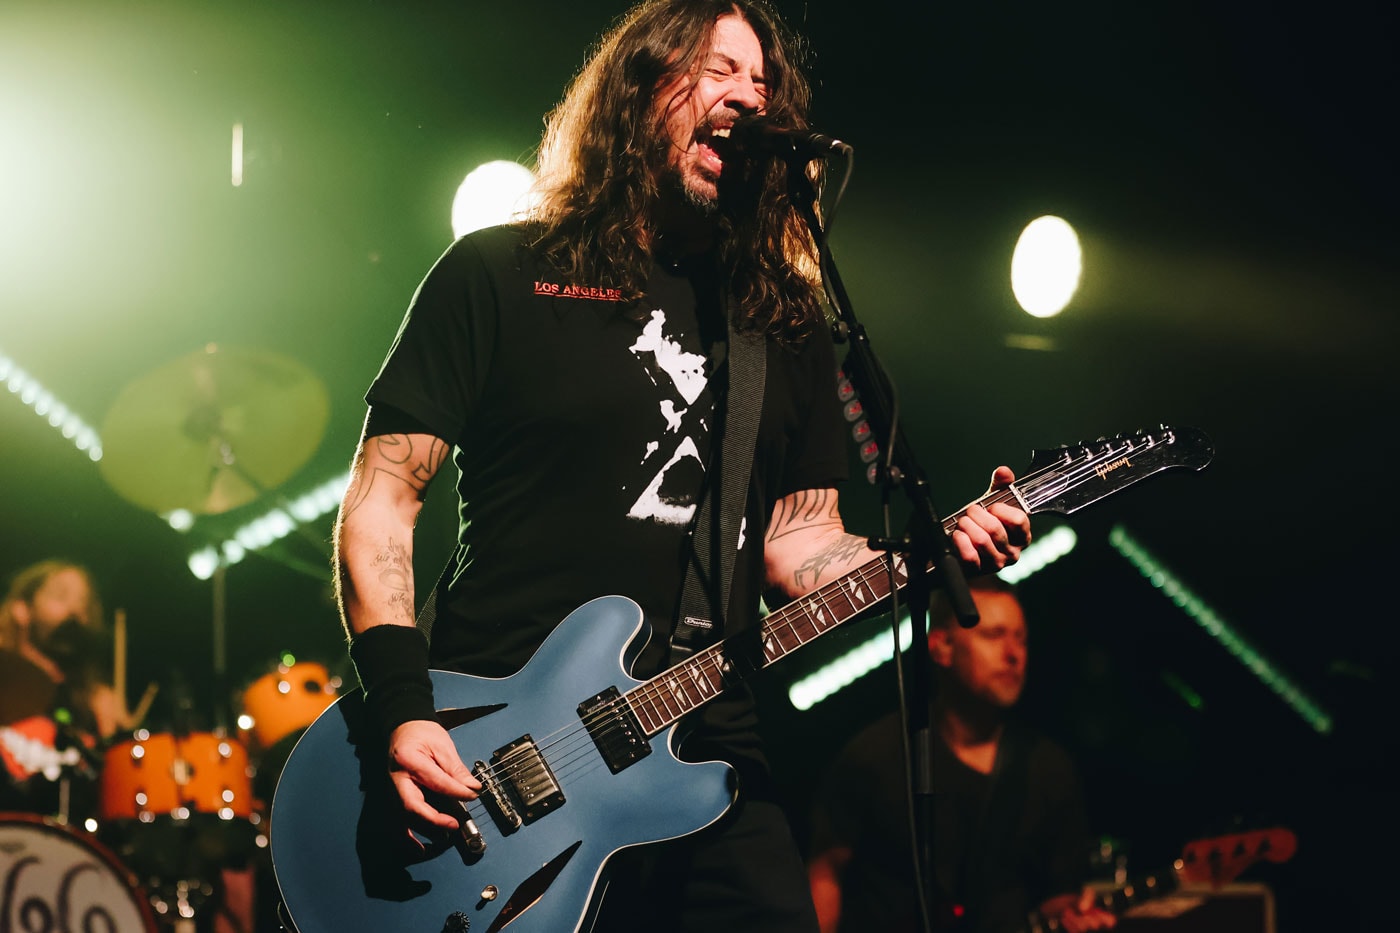 Foo Fighters Announces Cancelation of All Tour Dates in wake of taylor hawkins death dave grohl chris shiflett nate mendel franz stahl william goldsmith pat smear rami jaffee